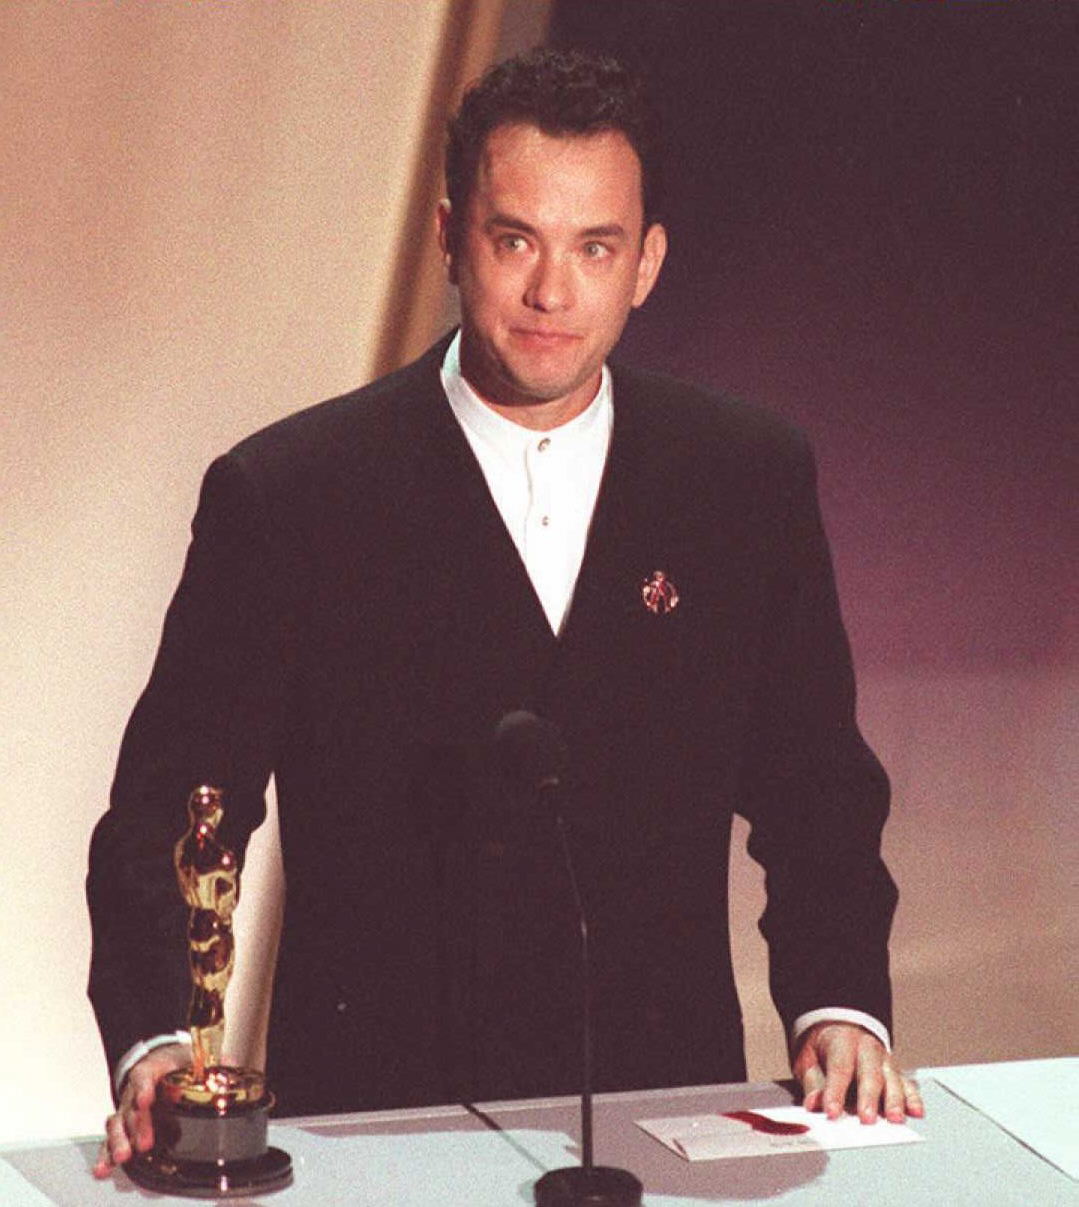 US actor Tom Hanks holds his Oscar 27 March as he speaks to the audience at the 67th annual Academy Awards